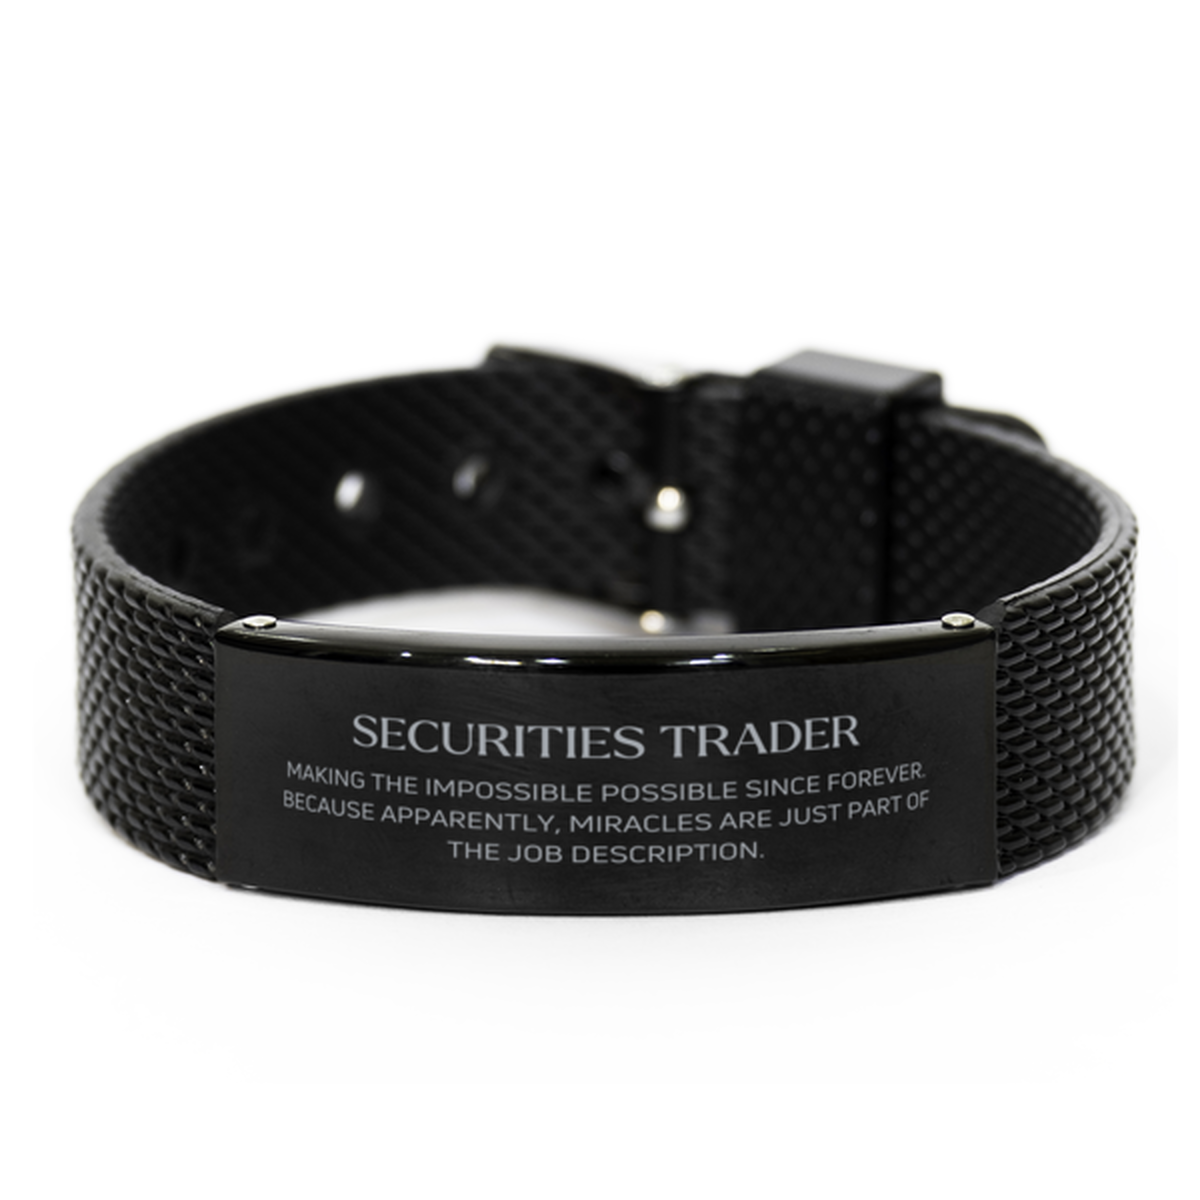 Funny Securities Trader Gifts, Miracles are just part of the job description, Inspirational Birthday Black Shark Mesh Bracelet For Securities Trader, Men, Women, Coworkers, Friends, Boss